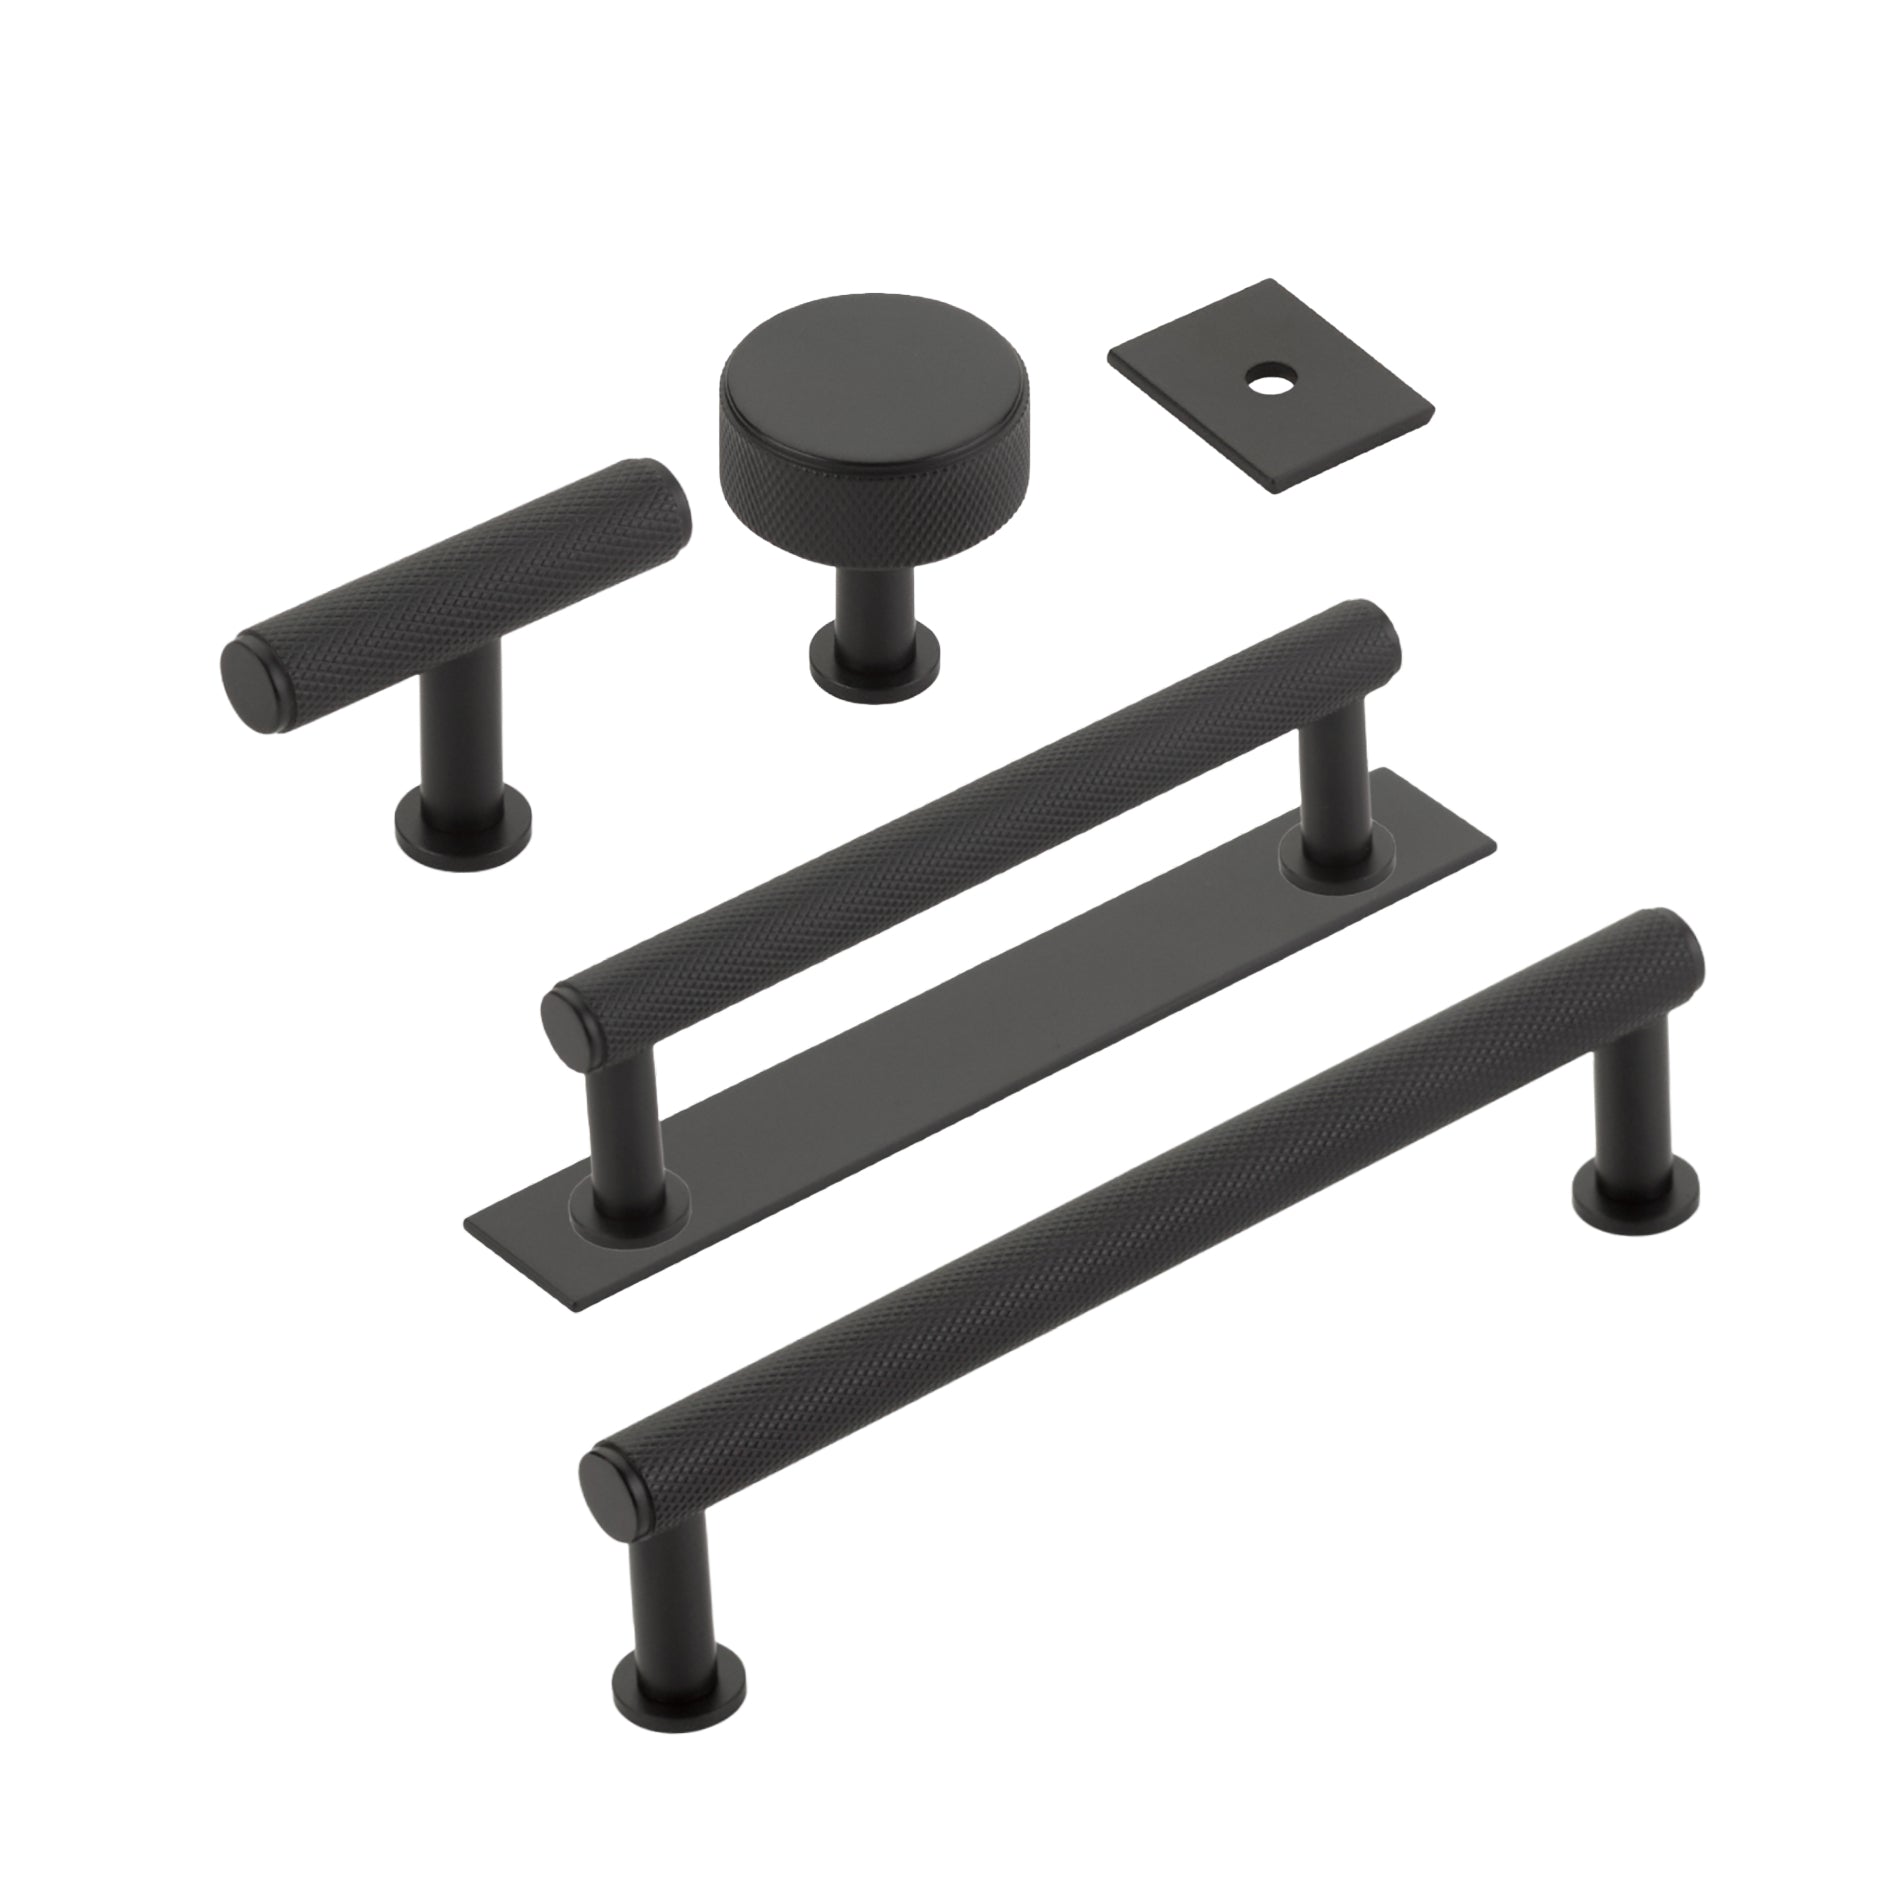 Matte Black "Maison" Knurled Drawer Pulls and Cabinet Knobs with Optional Backplate - Forge Hardware Studio